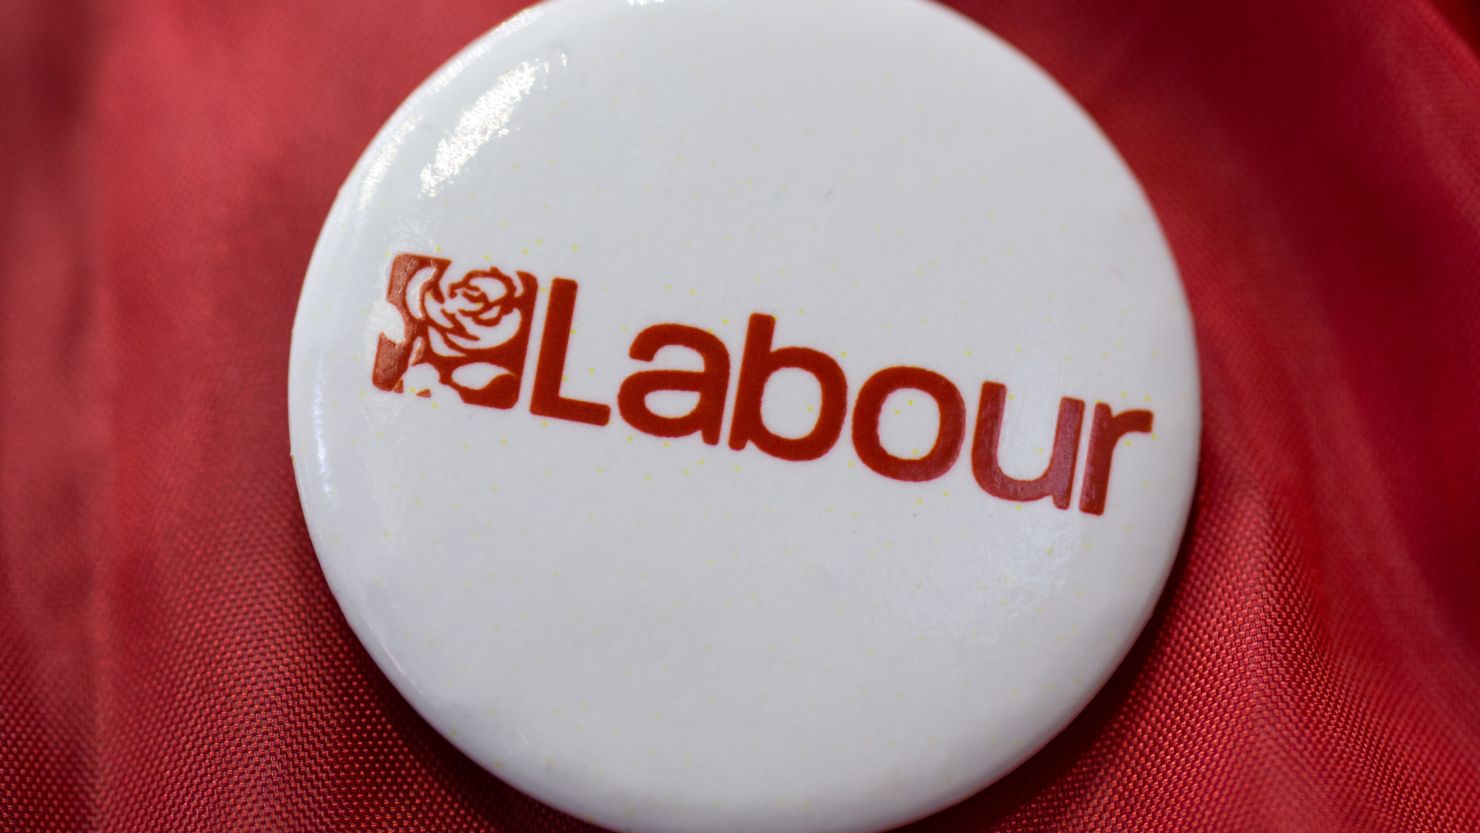 The Labour Party has been accused of failing to tackle anti-Semitism within its ranks.